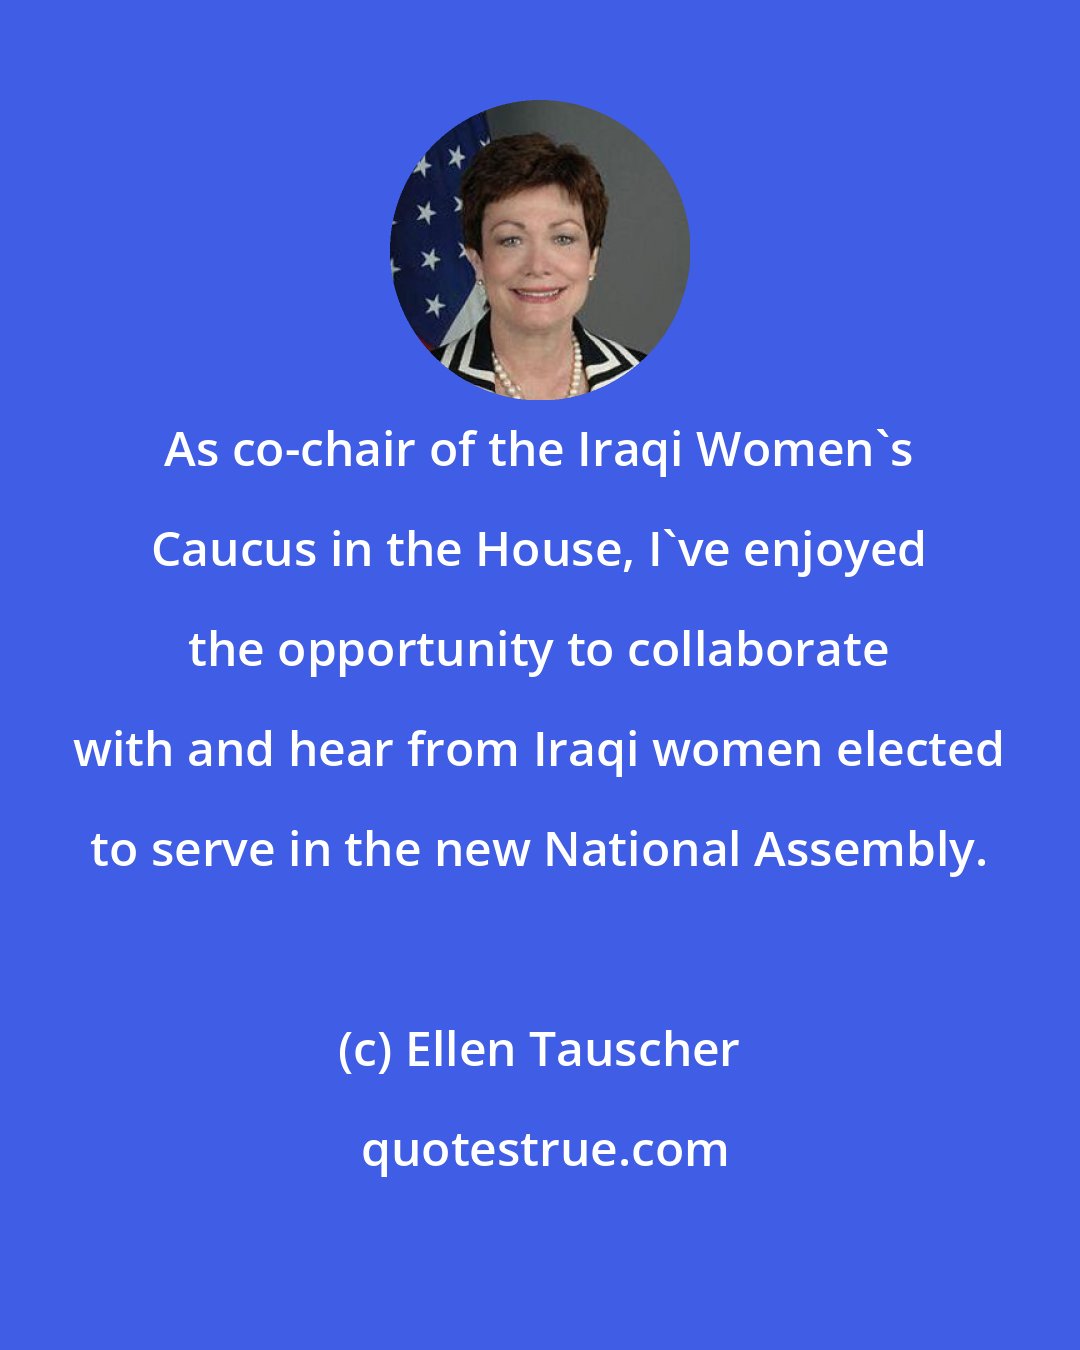 Ellen Tauscher: As co-chair of the Iraqi Women's Caucus in the House, I've enjoyed the opportunity to collaborate with and hear from Iraqi women elected to serve in the new National Assembly.